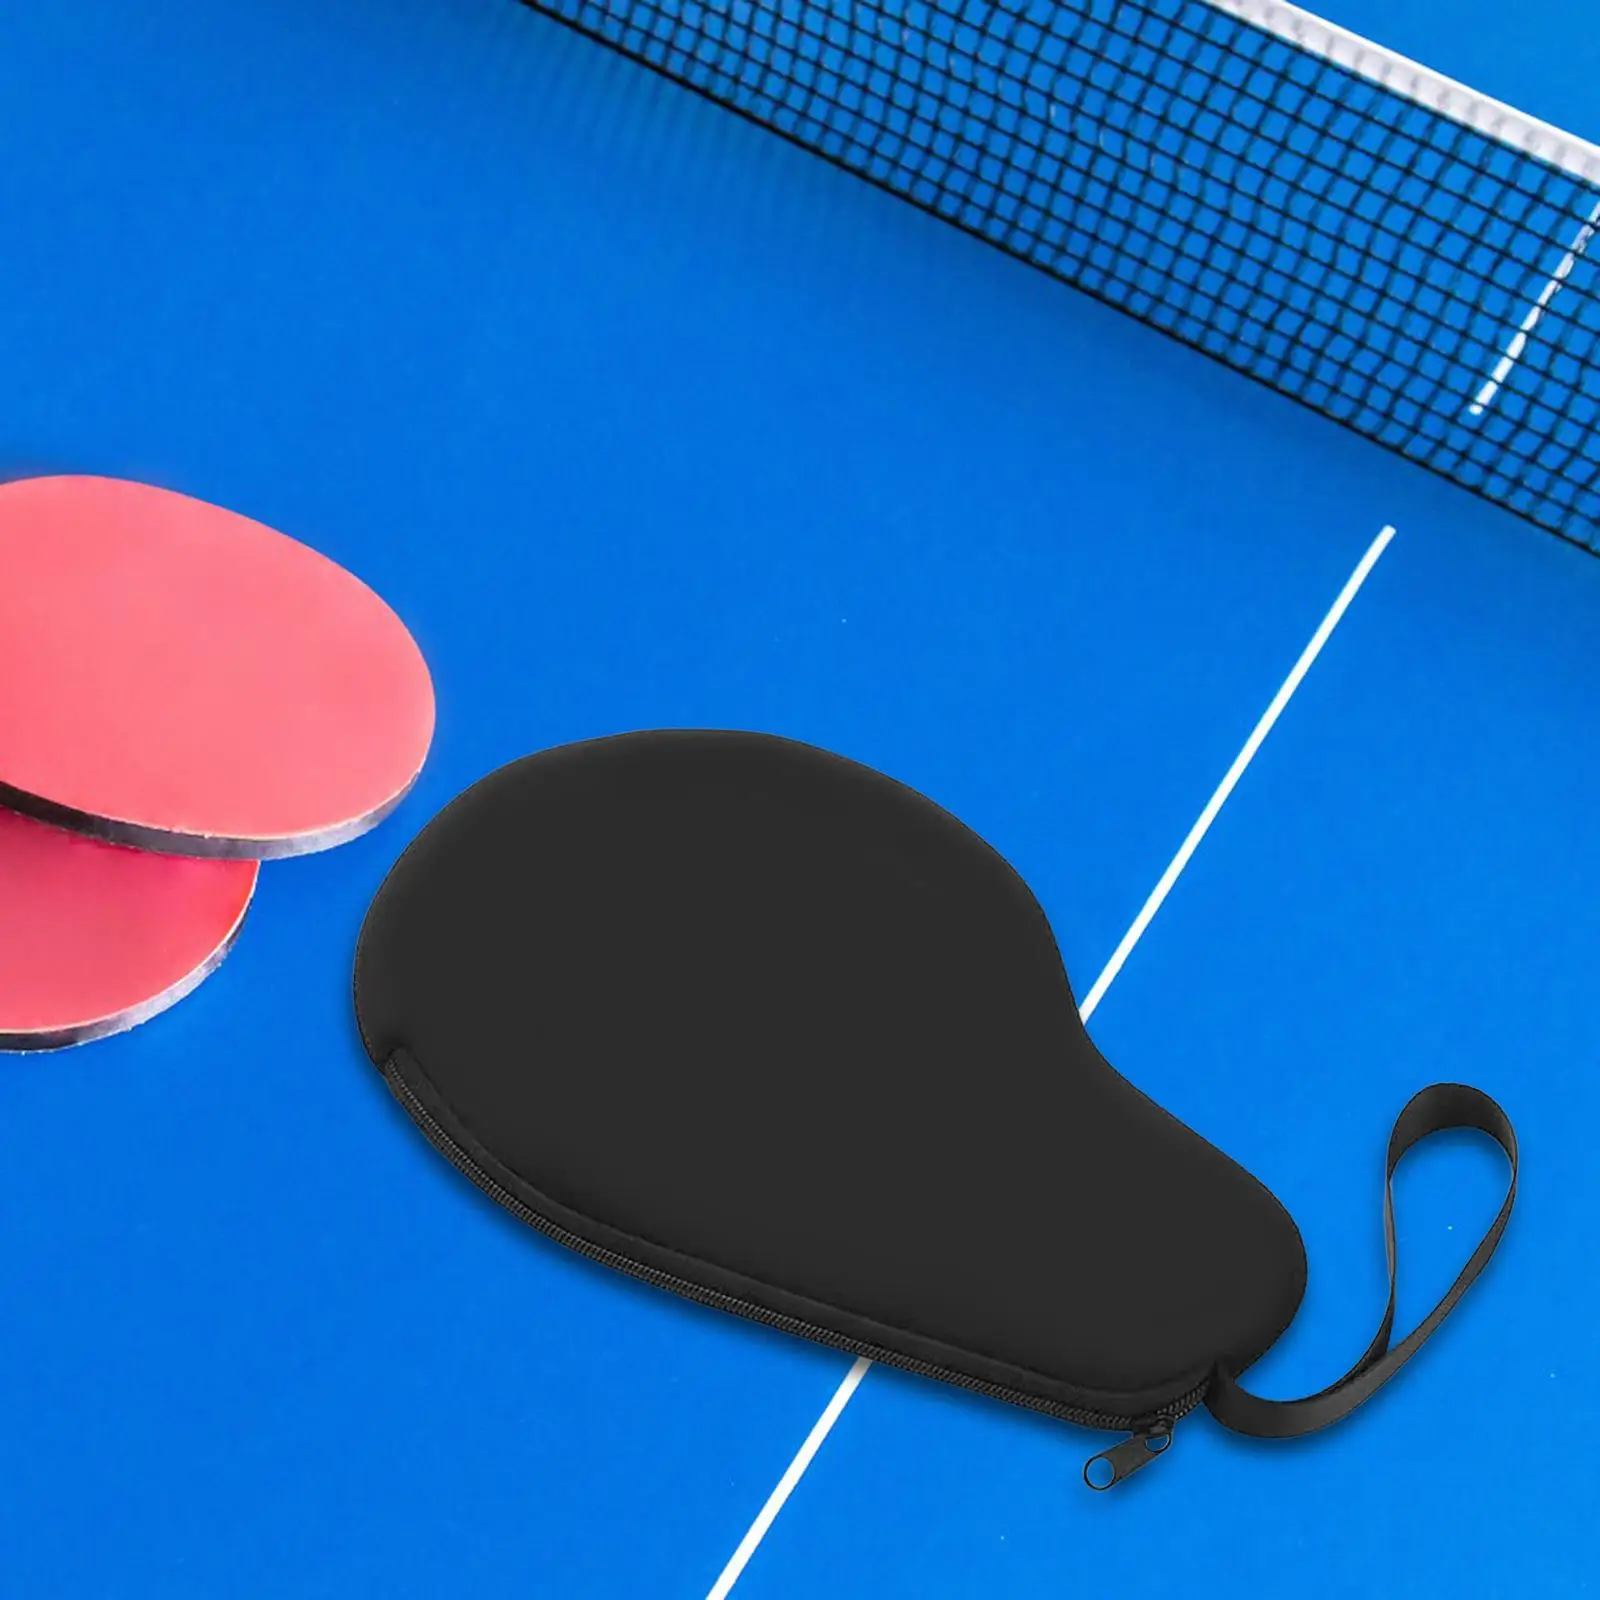 Ping Pong Paddle Case Storage Wear Resistant Portable Scratch Resistant Table Tennis Cover for Unisex Sportsman Adult Youth Gym